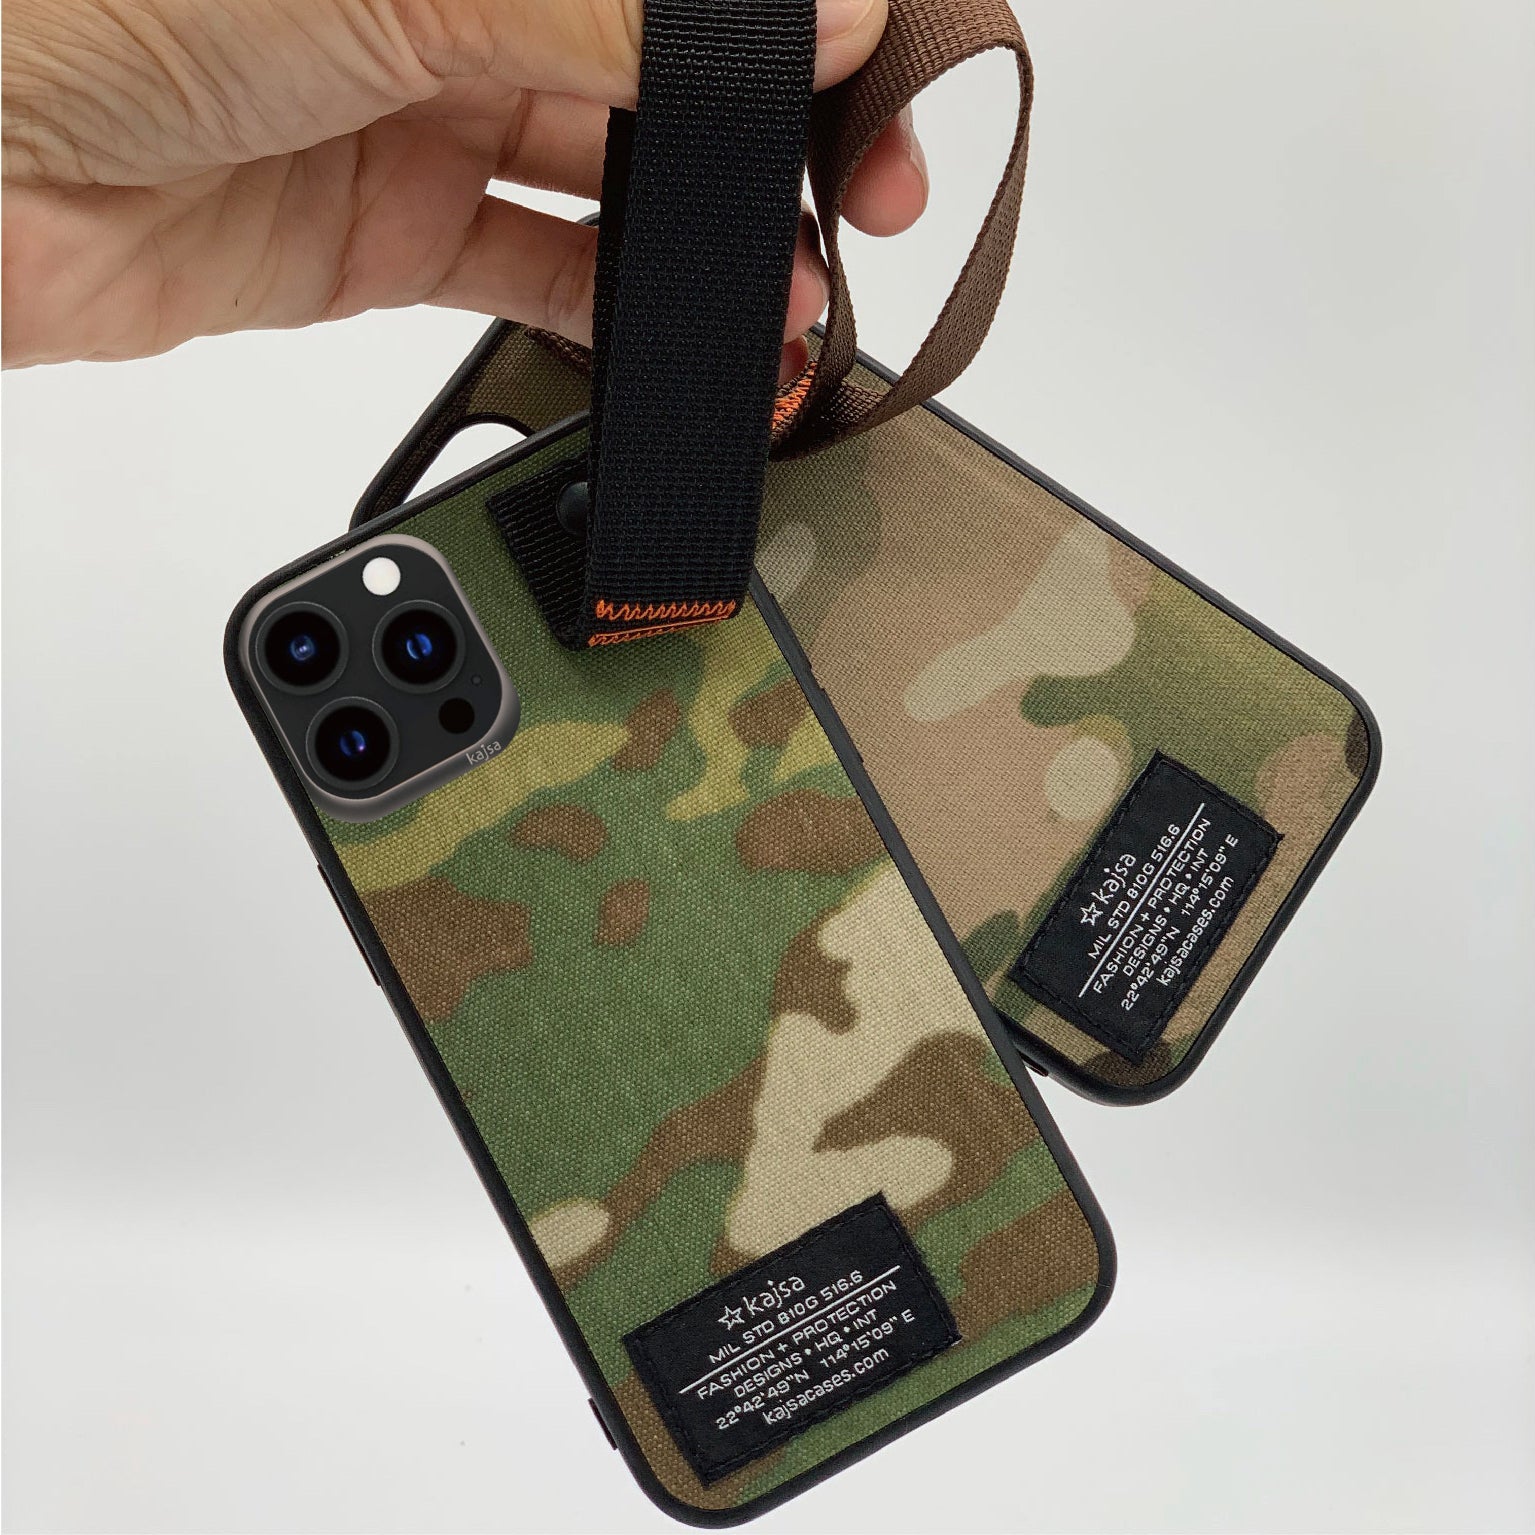 Military Collection - Straps Back Case for iPhone 13-Phone Case- phone case - phone cases- phone cover- iphone cover- iphone case- iphone cases- leather case- leather cases- DIYCASE - custom case - leather cover - hand strap case - croco pattern case - snake pattern case - carbon fiber phone case - phone case brand - unique phone case - high quality - phone case brand - protective case - buy phone case hong kong - online buy phone case - iphone‎手機殼 - 客製化手機殼 - samsung ‎手機殼 - 香港手機殼 - 買電話殼